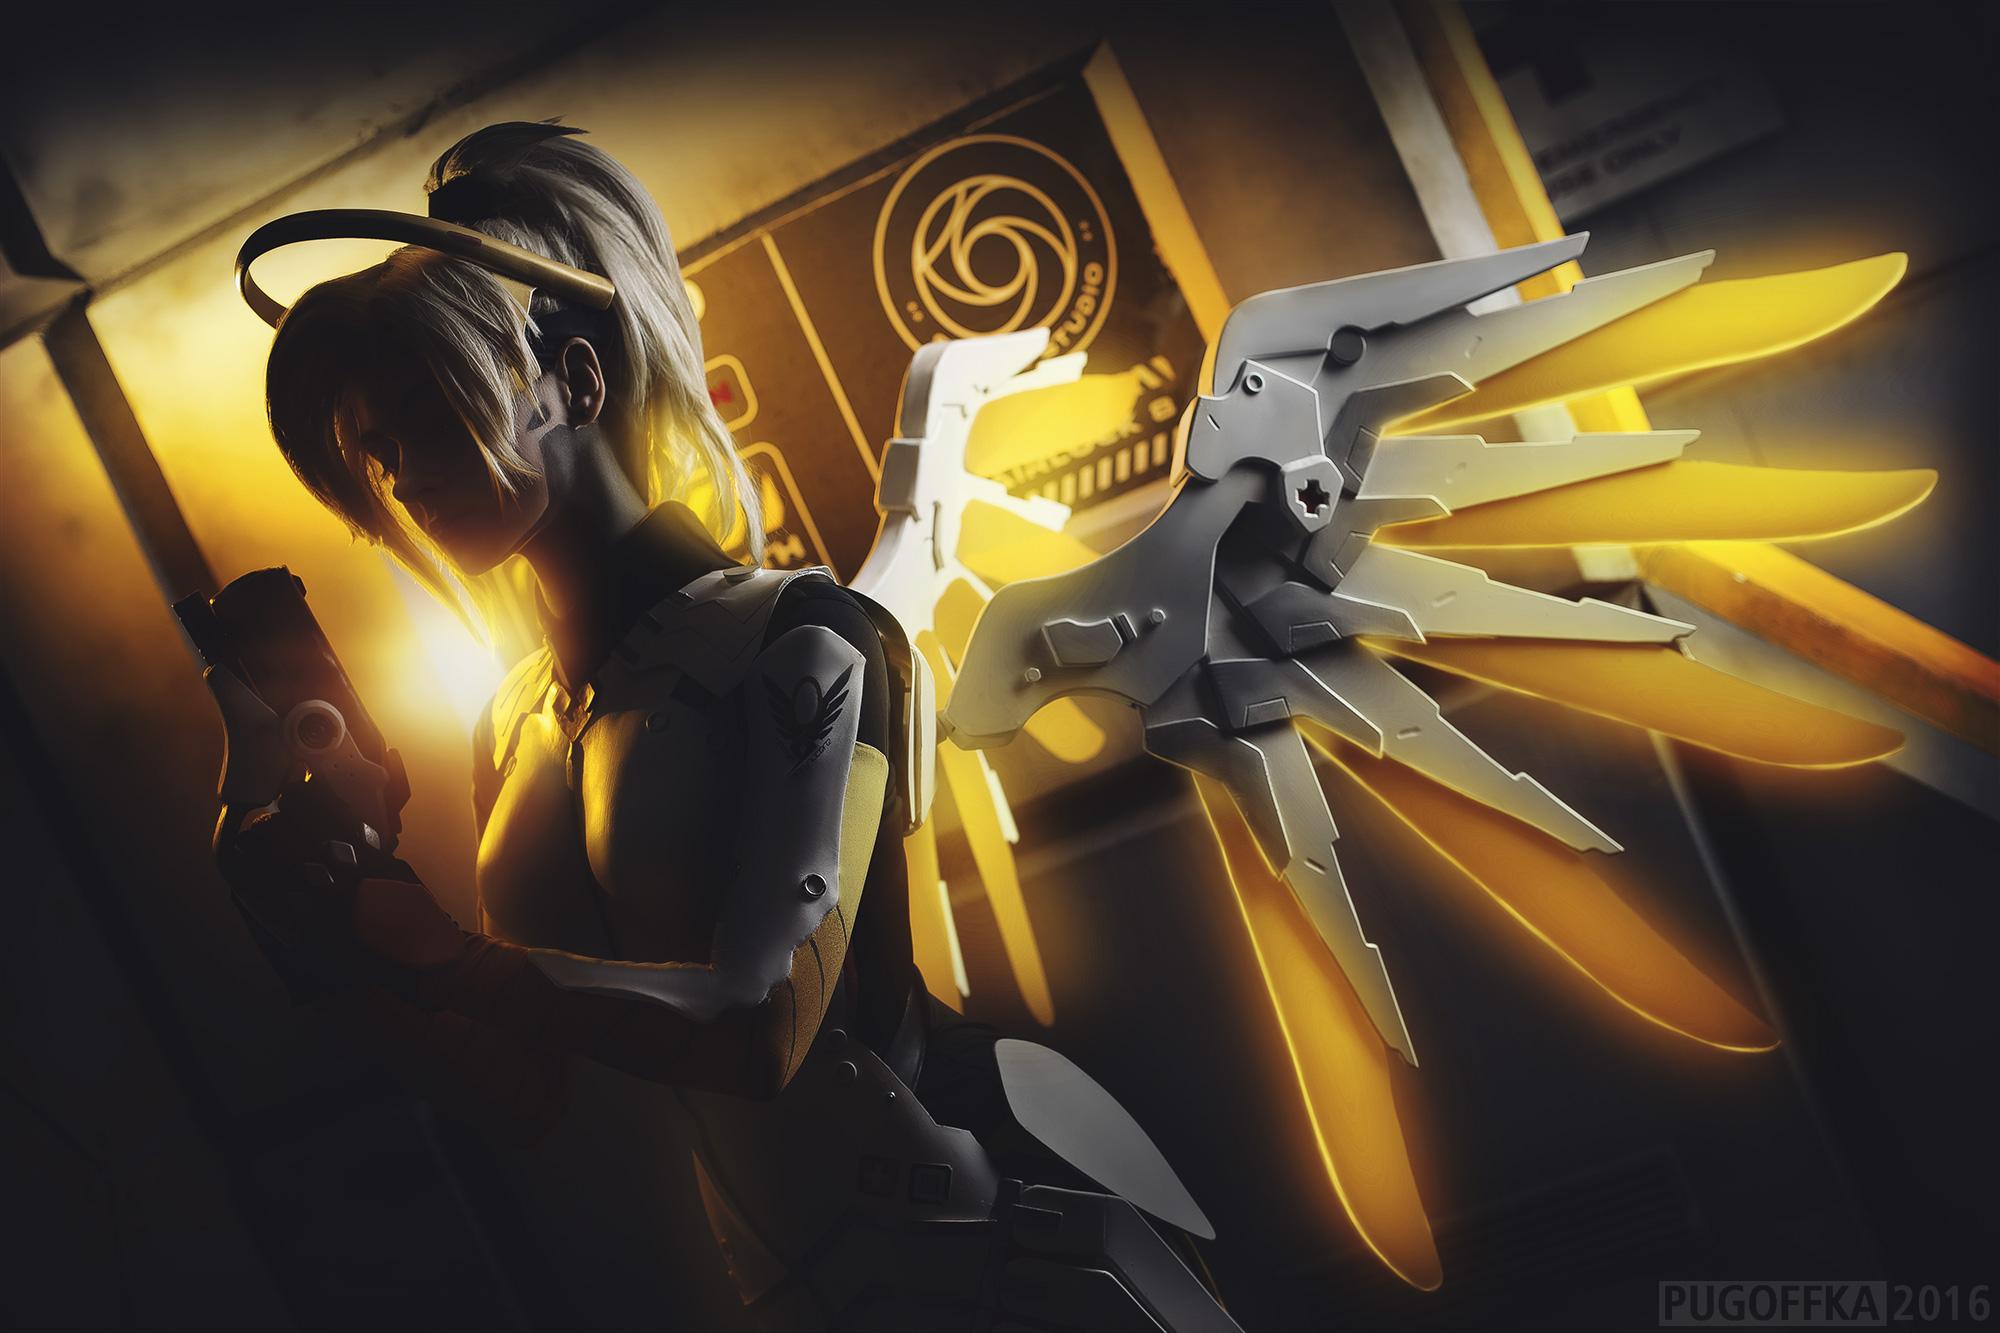 Stunning Overwatch Mercy HD Wallpaper image For Free